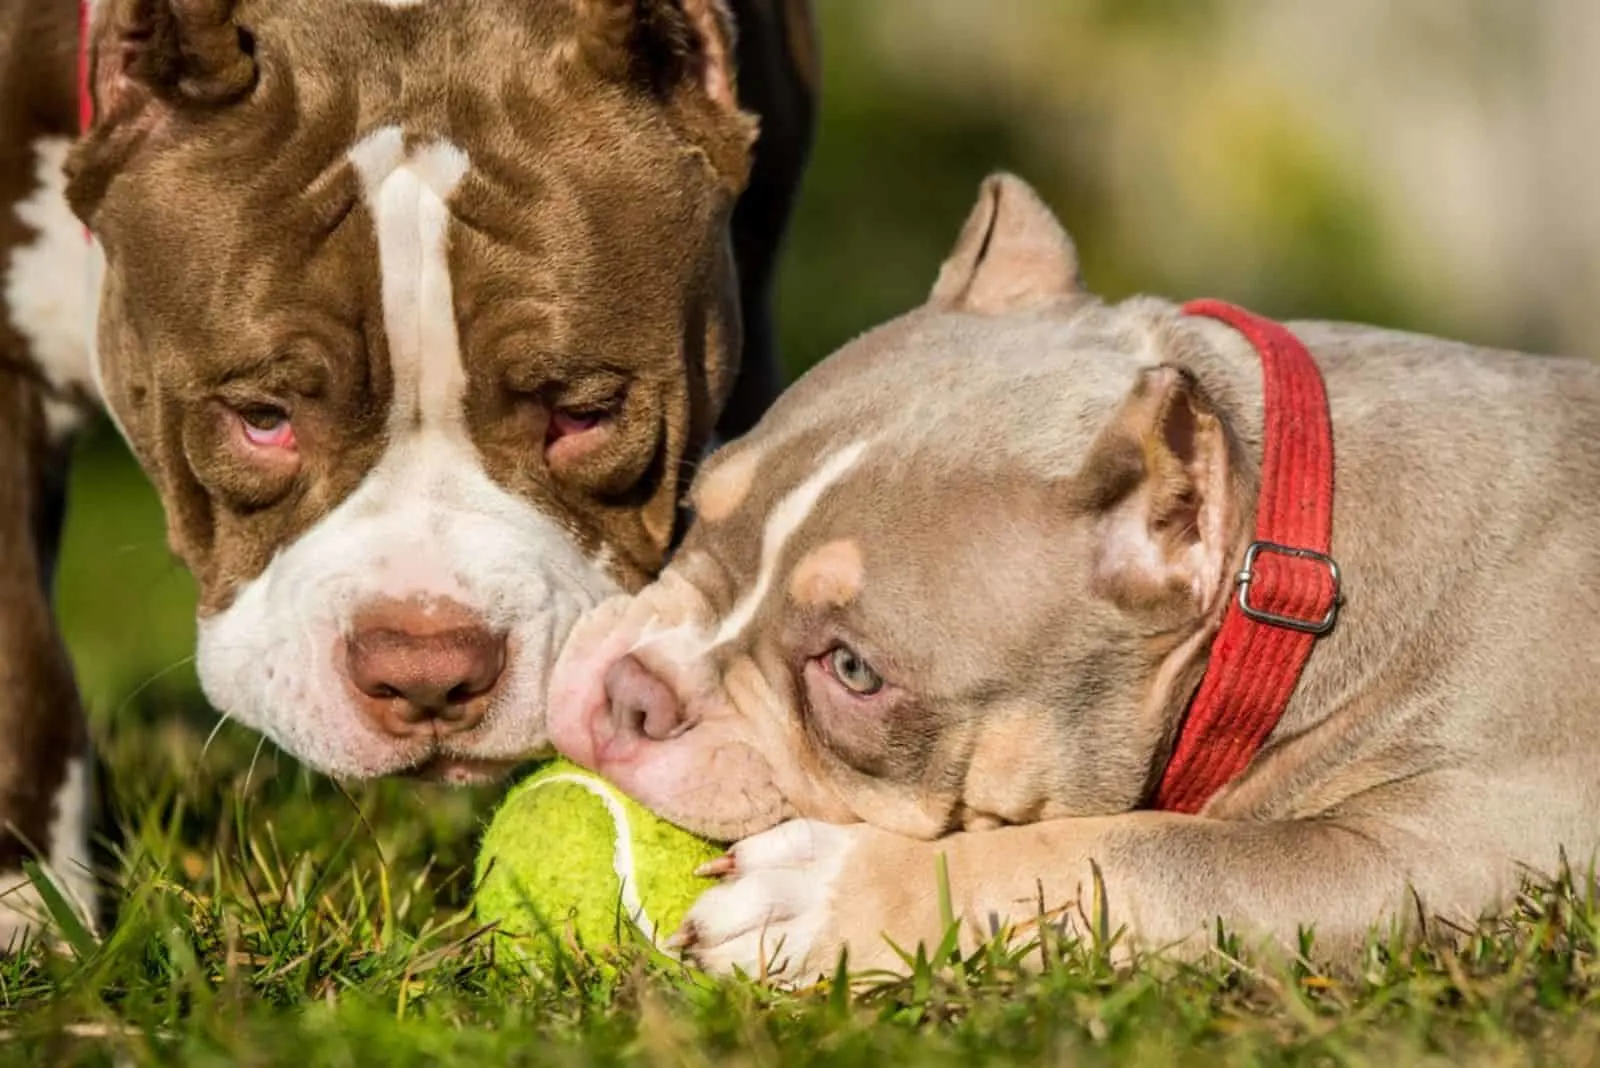 Two American Bully puppies dogs are playing with tennis ball on grass